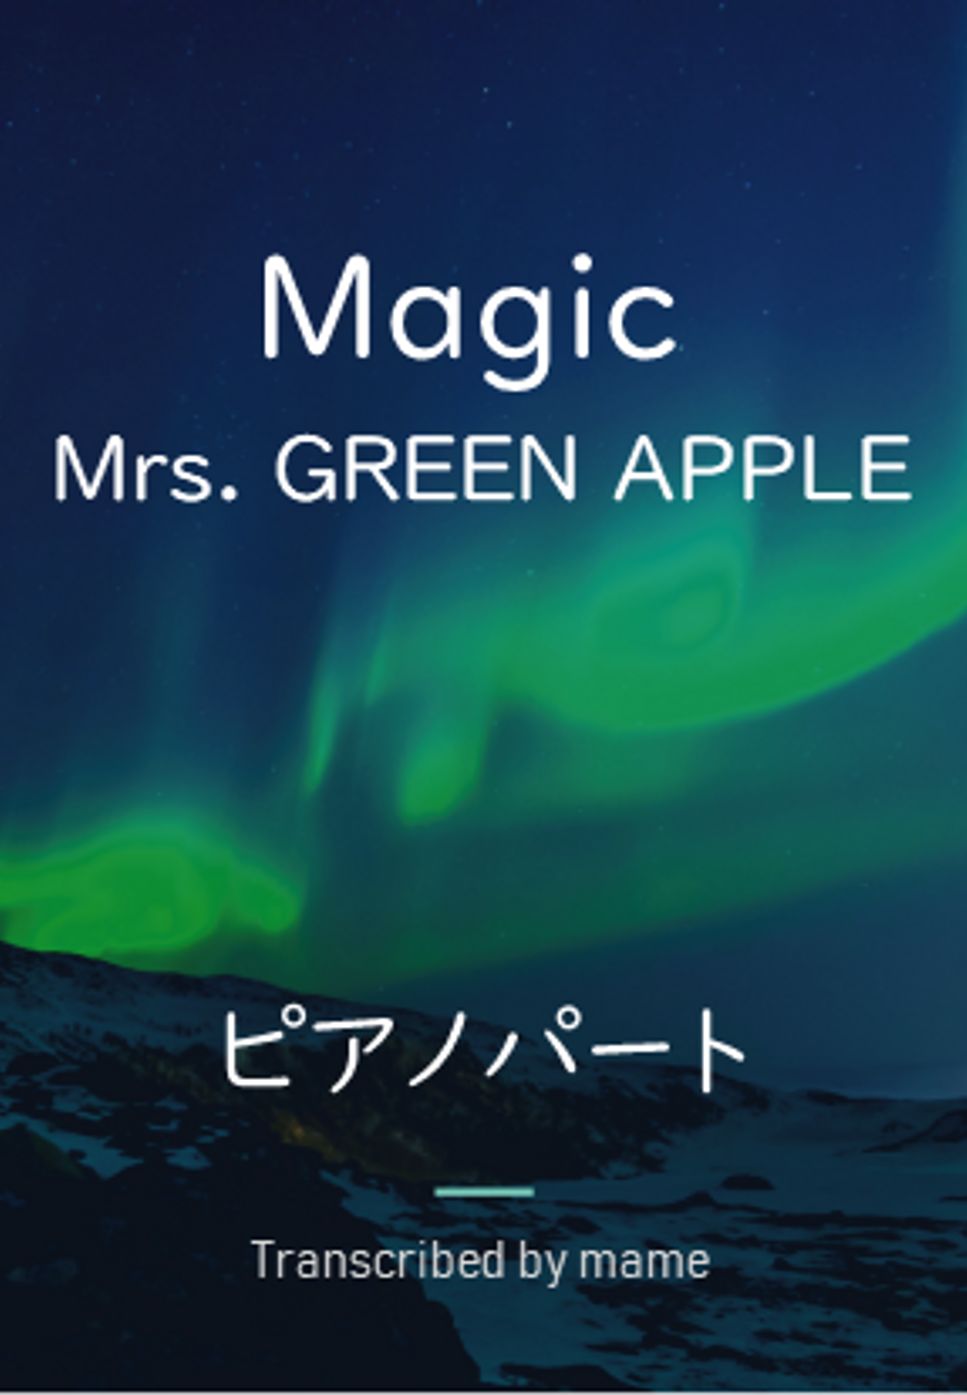 Mrs. GREEN APPLE - Magic (keyboard part) by mame